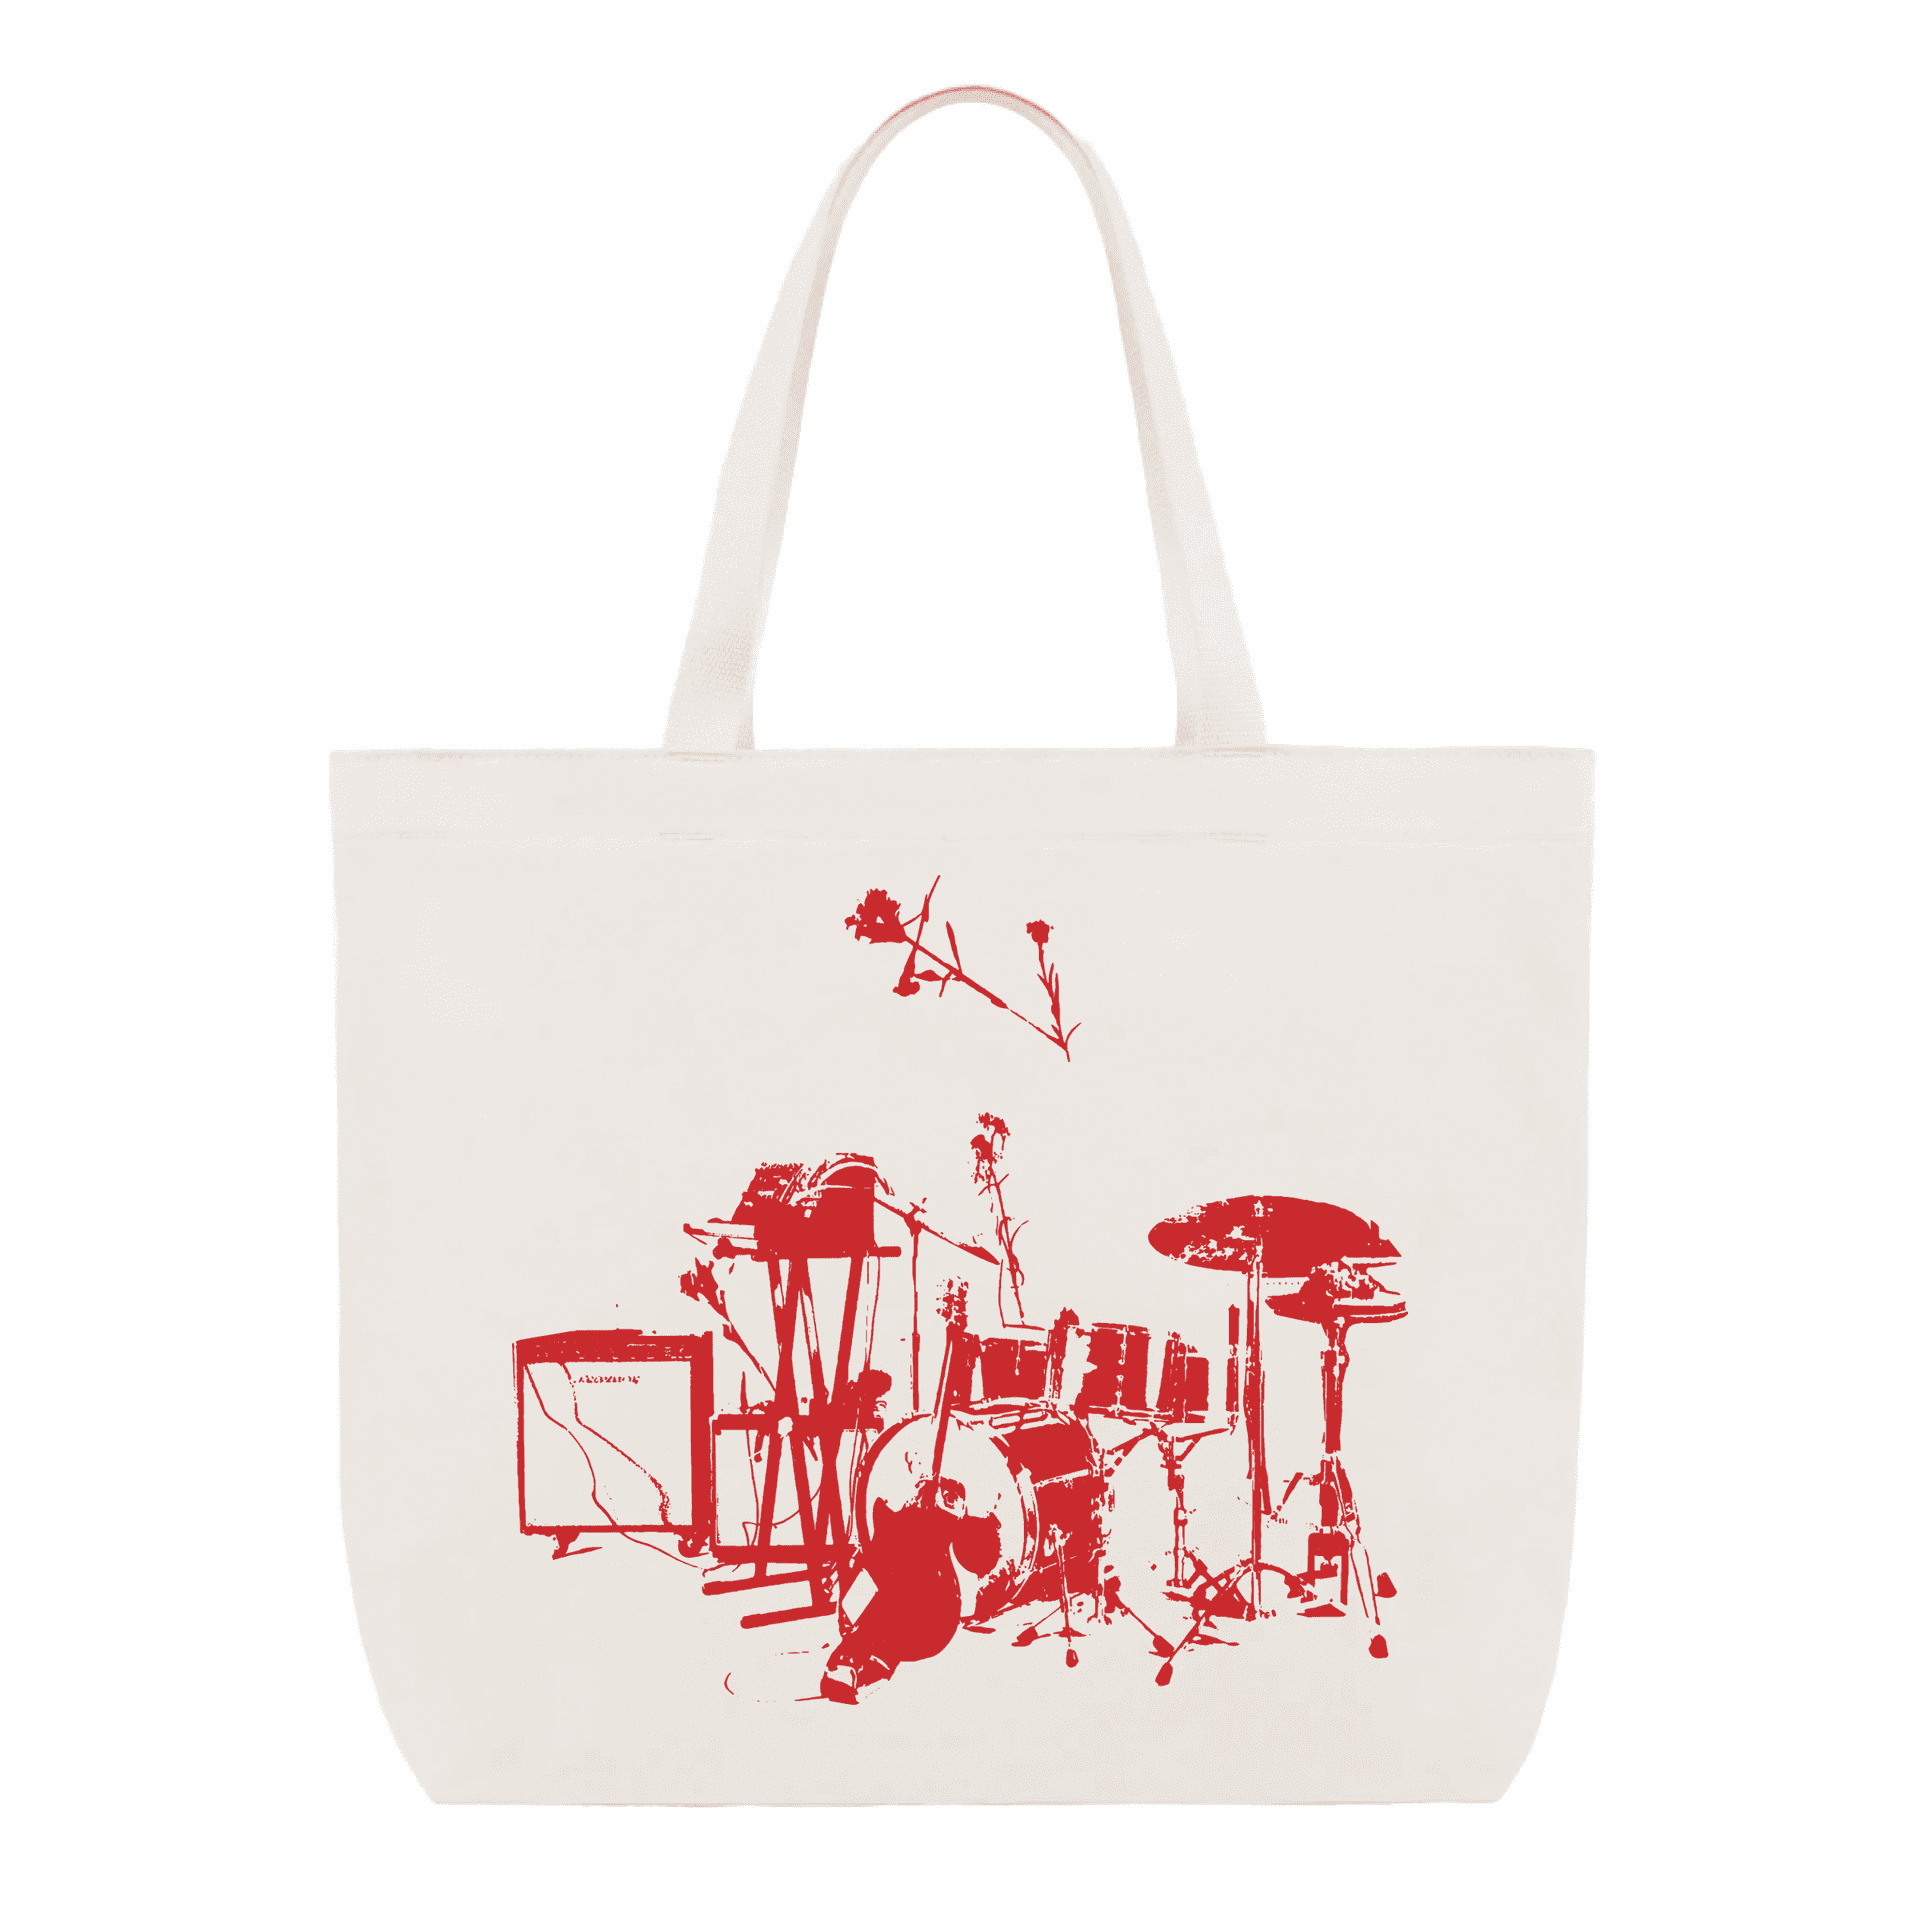 ‘SHADOW OFFERING’ TOTE BAG